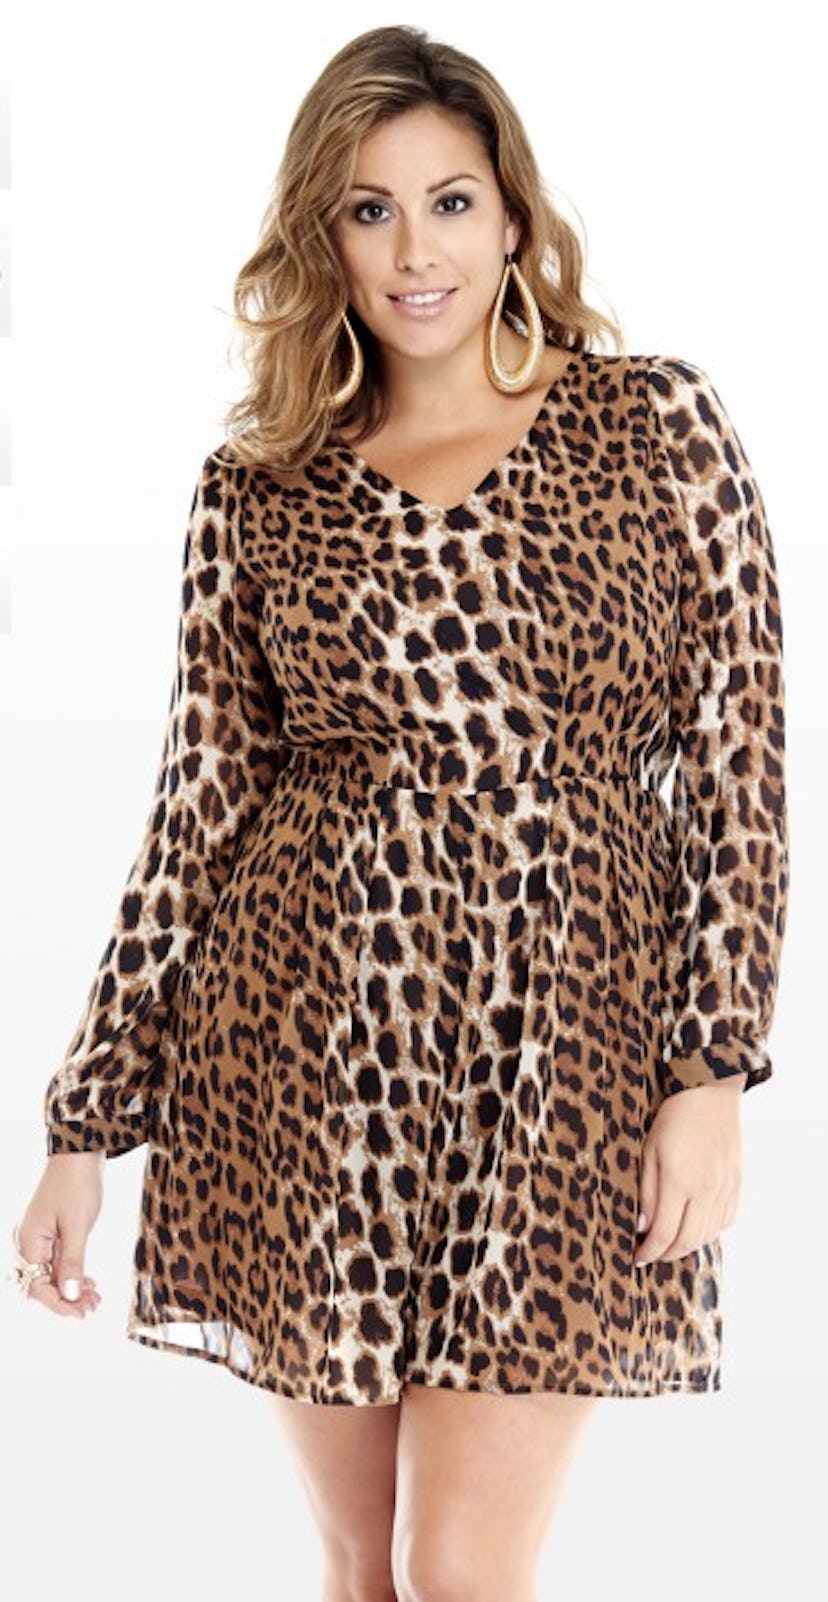 Shopping 9 Fall 2014 Fashion Trends in Plus-Sizes, from Leopard Print ...